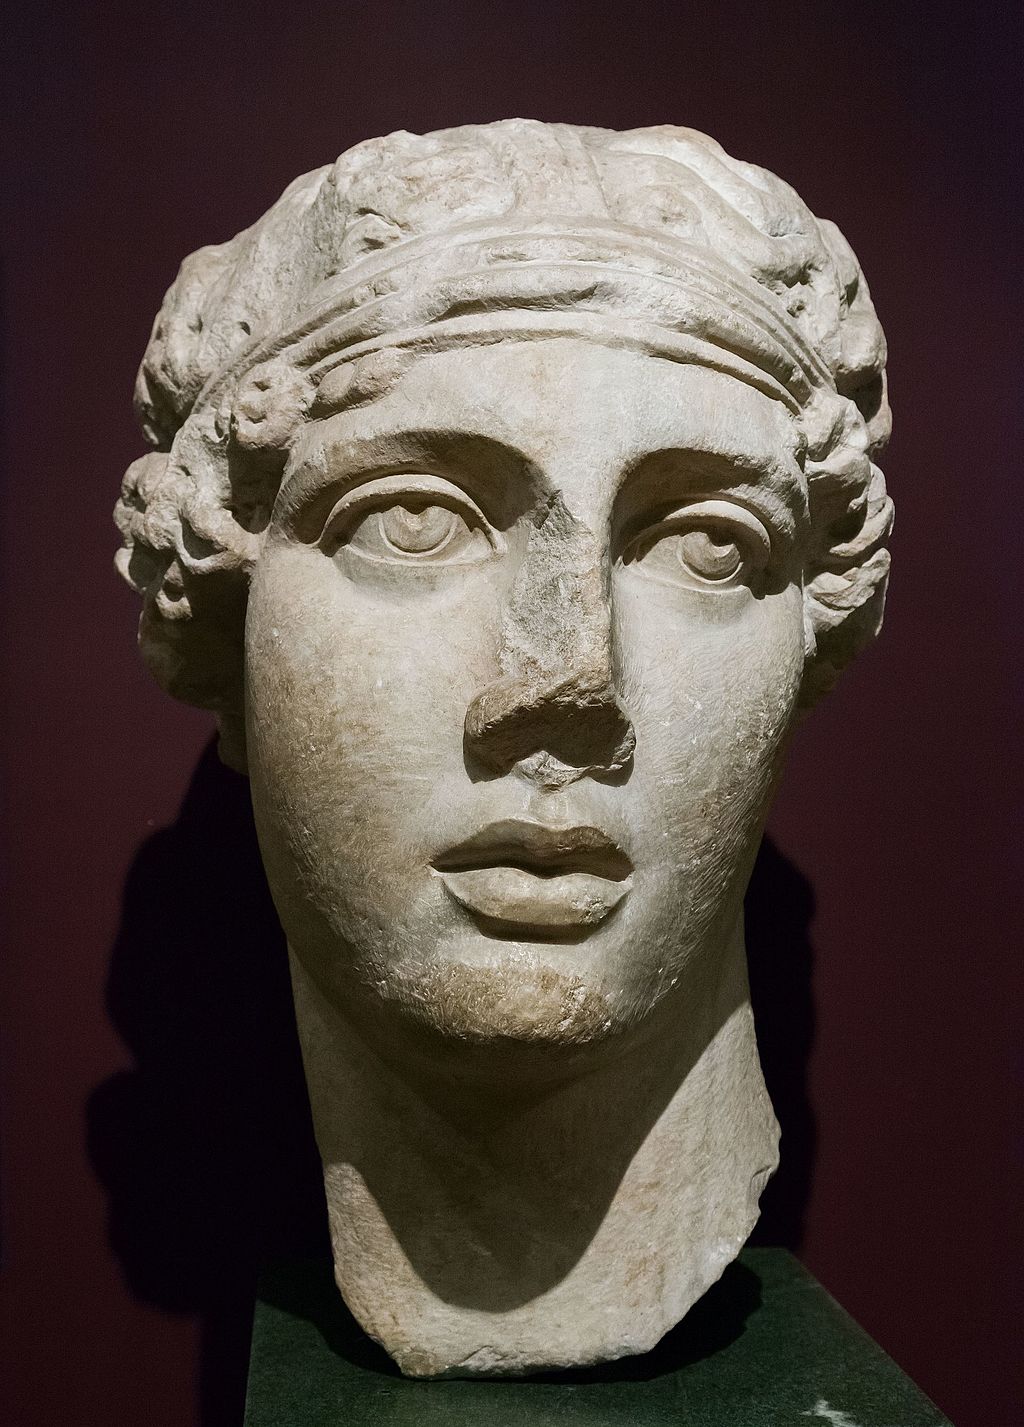 Sappho's portrait from the Istanbul Archaeology Museums. Roman copy of an original from the Hellenistic period